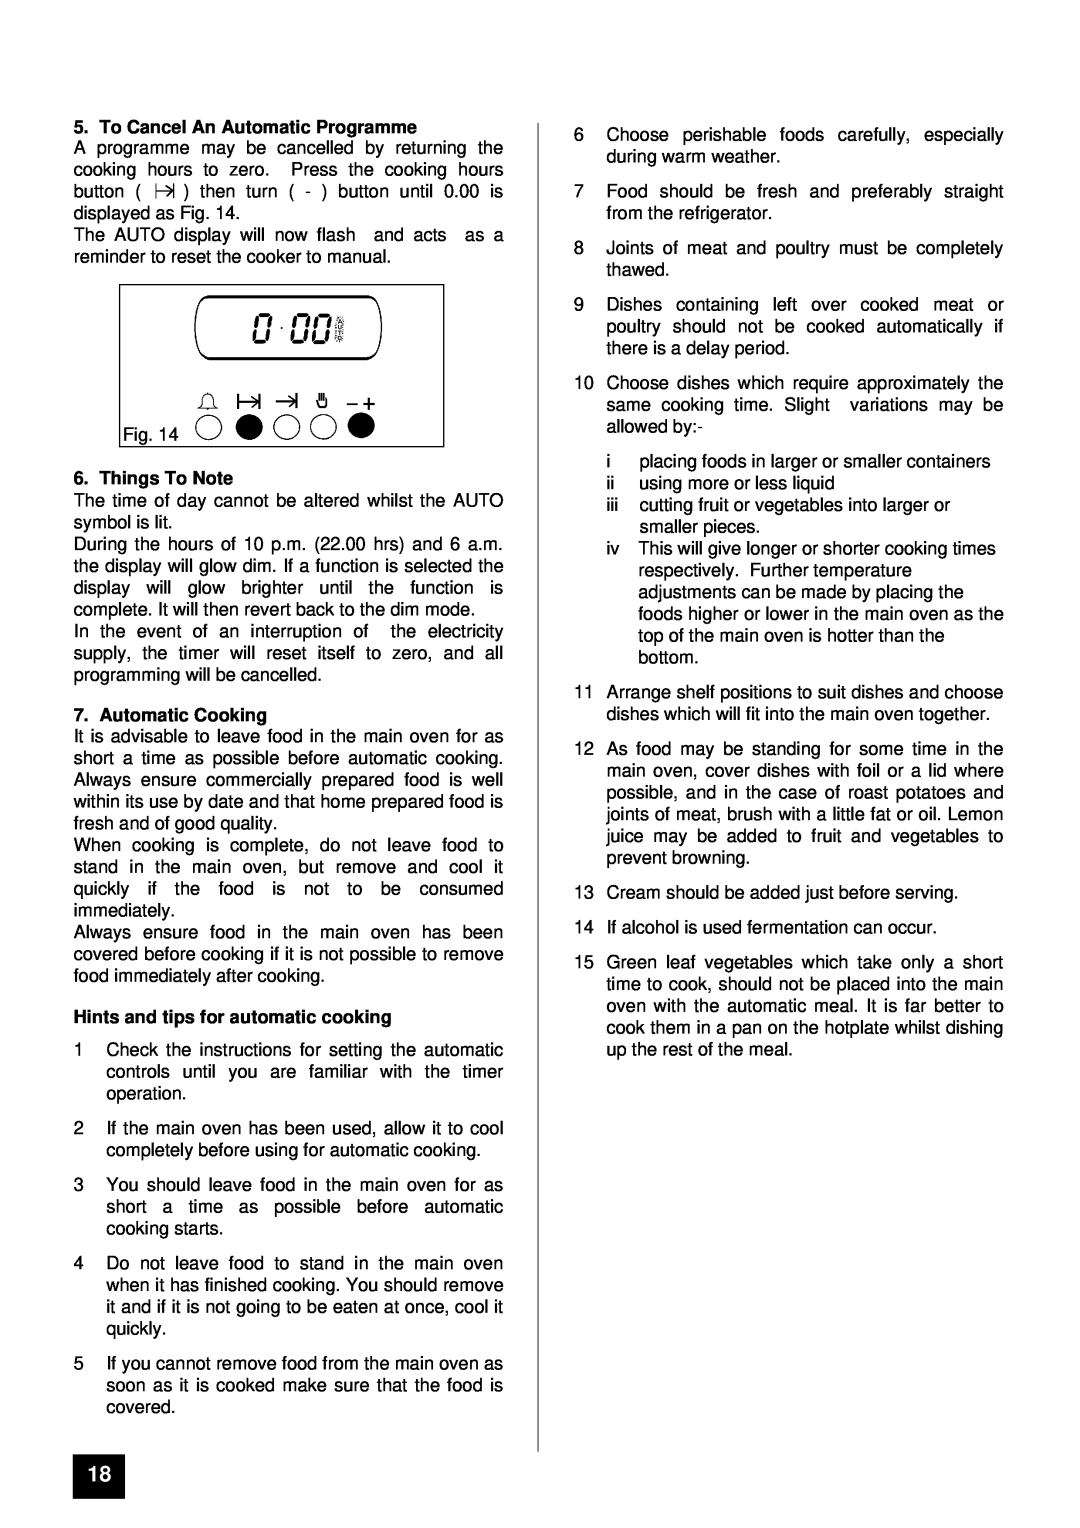 Zanussi ZDF867X To Cancel An Automatic Programme, Things To Note, Automatic Cooking, Hints and tips for automatic cooking 